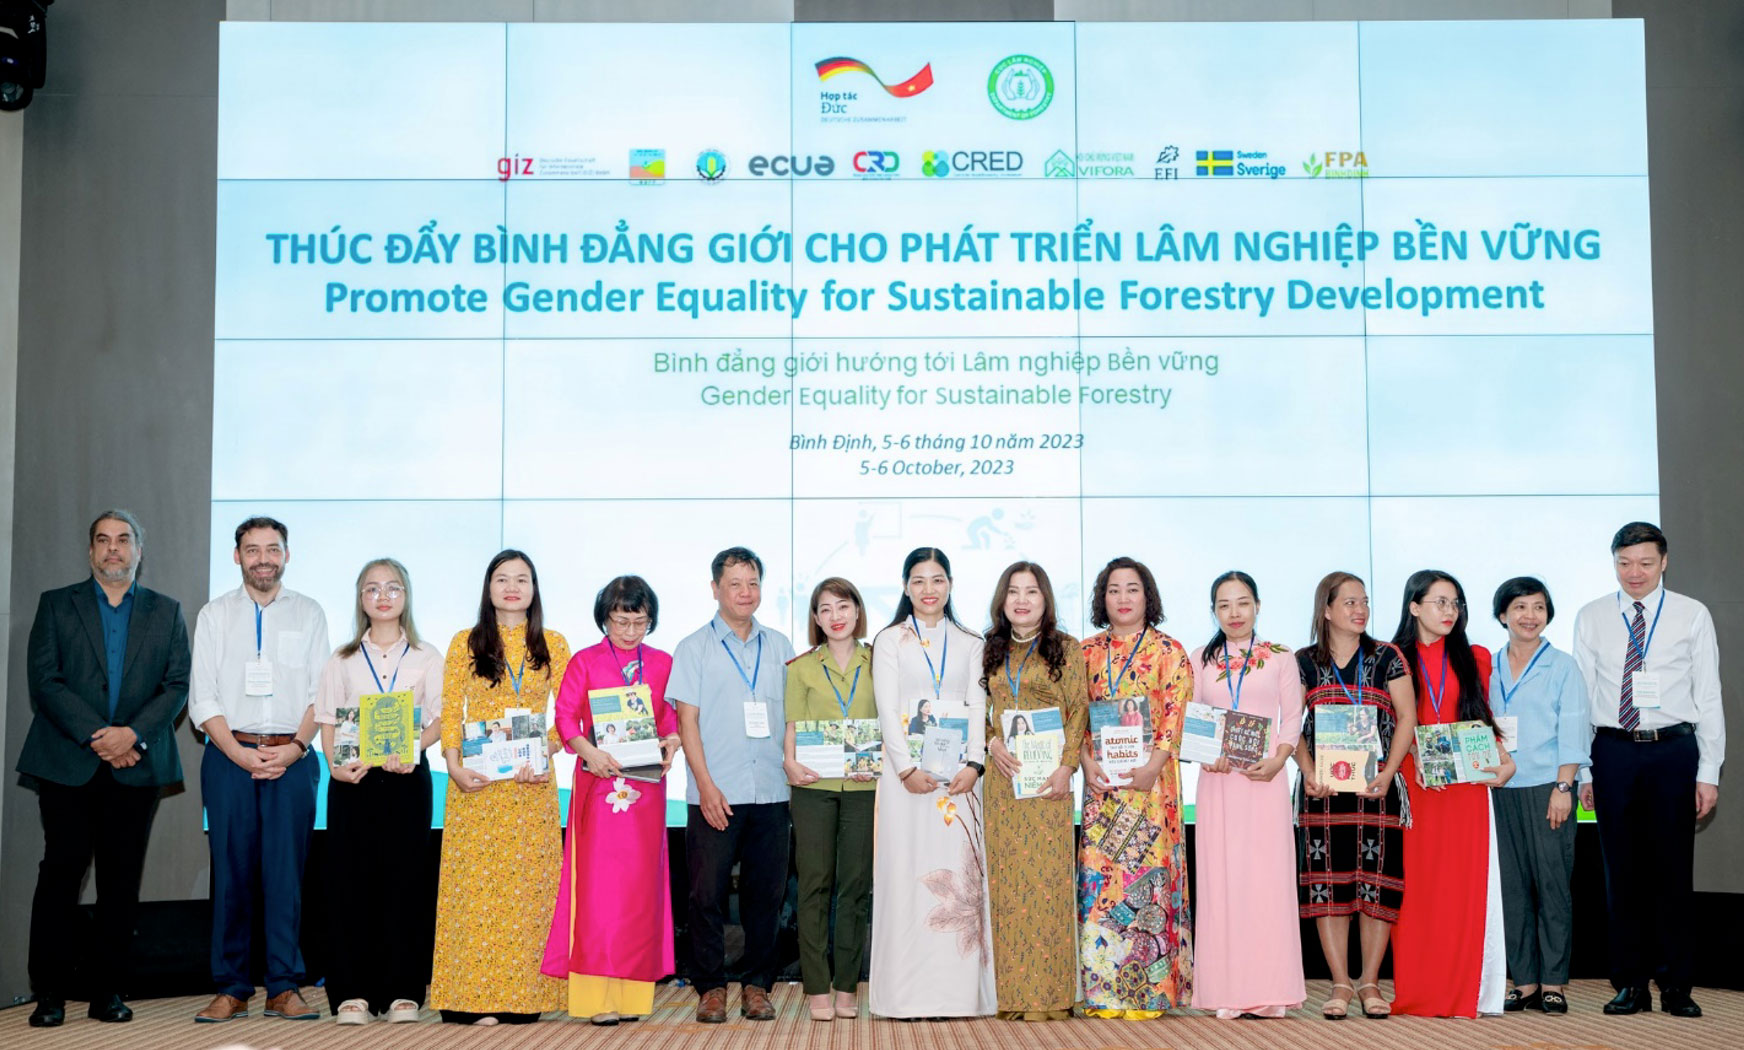 The 10 women featured in the exhibition “Forestry through Women’s Eyes” were recognized for their inspiring contributions.